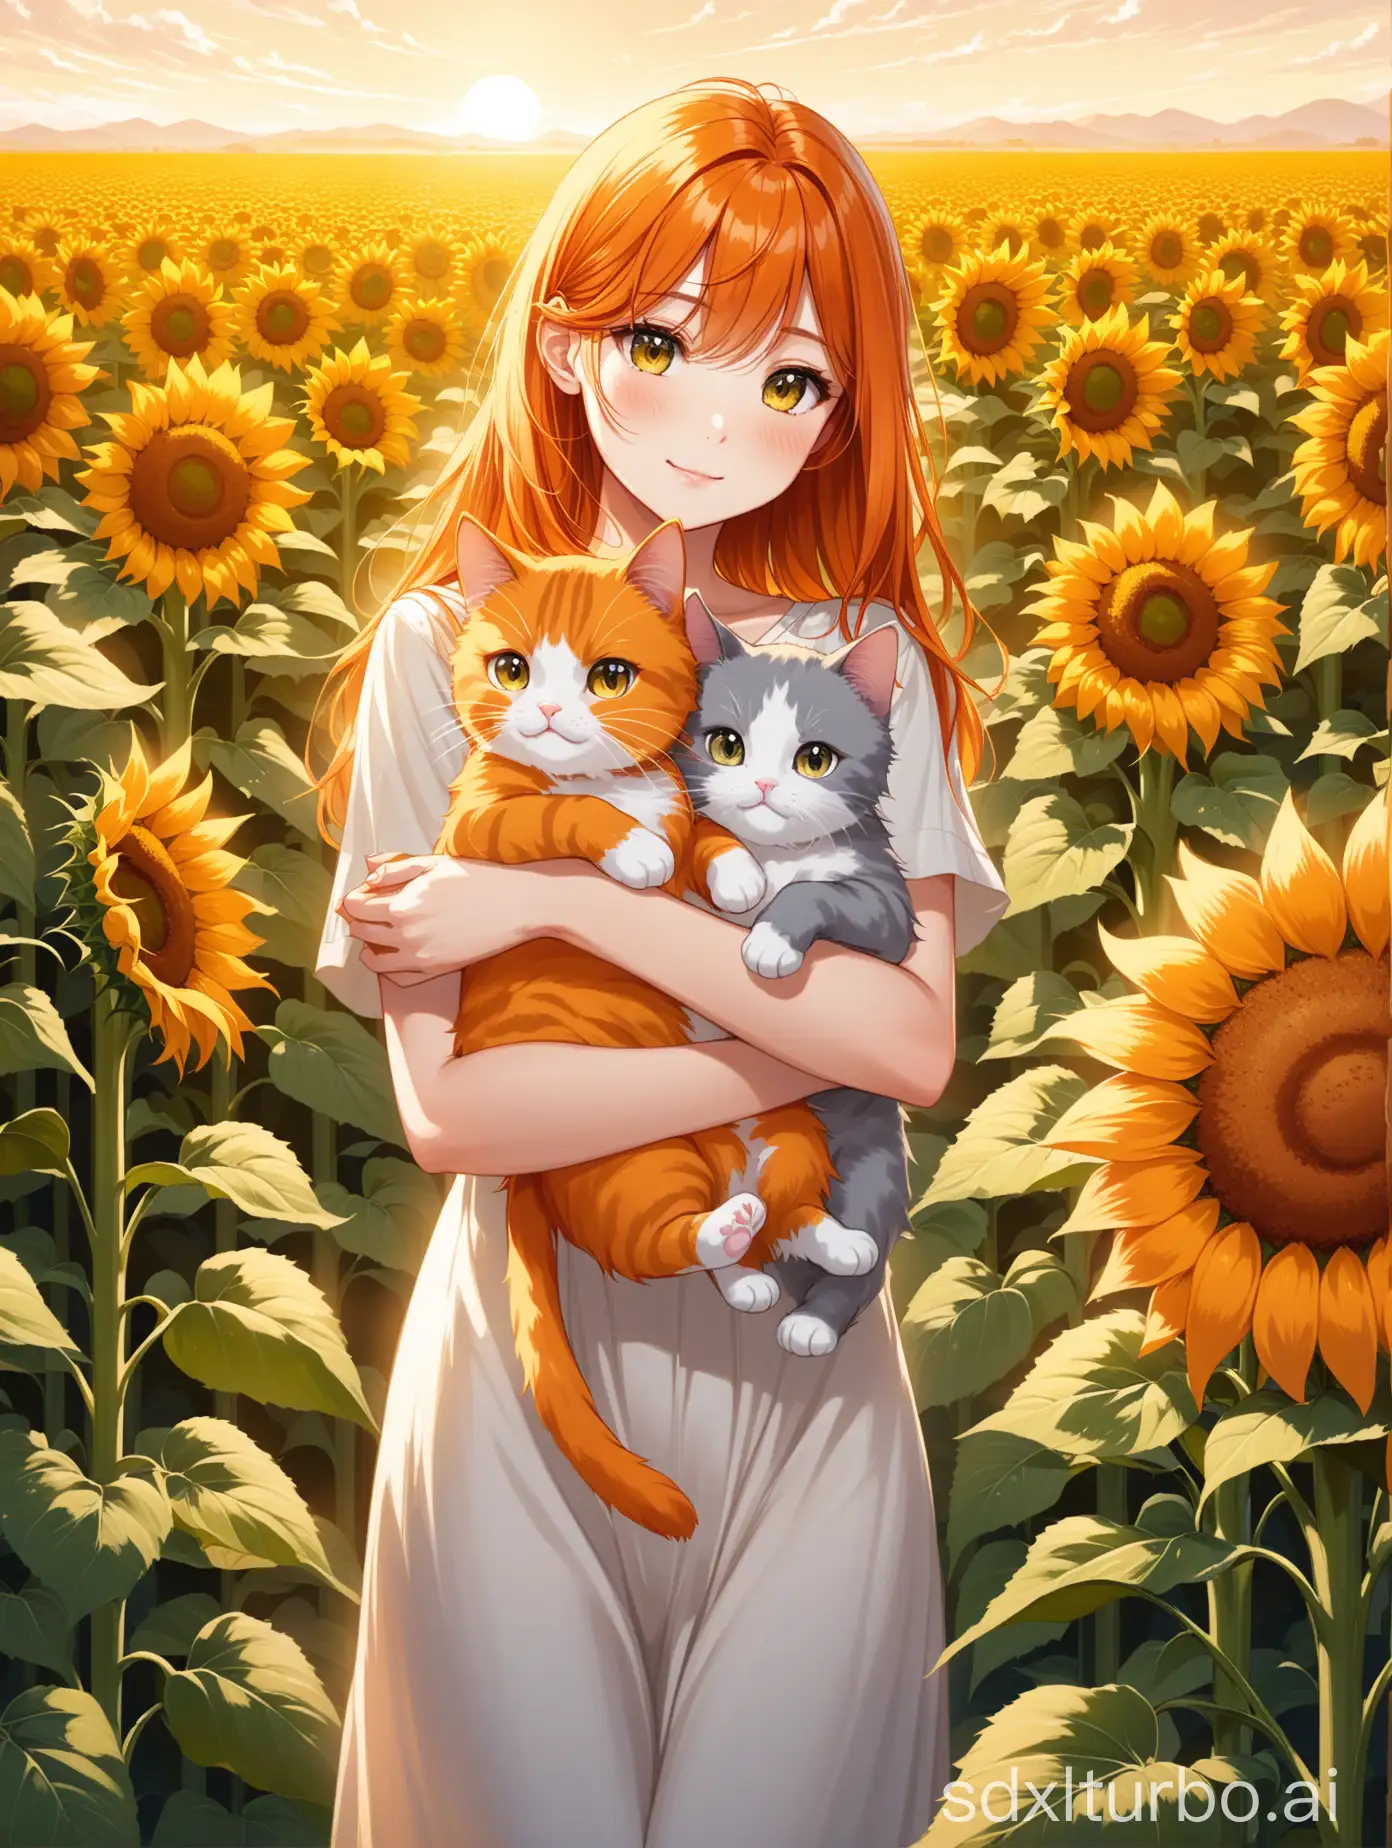 Woman-with-Orange-Hair-Playing-in-Sunflower-Fields-with-Two-Cats